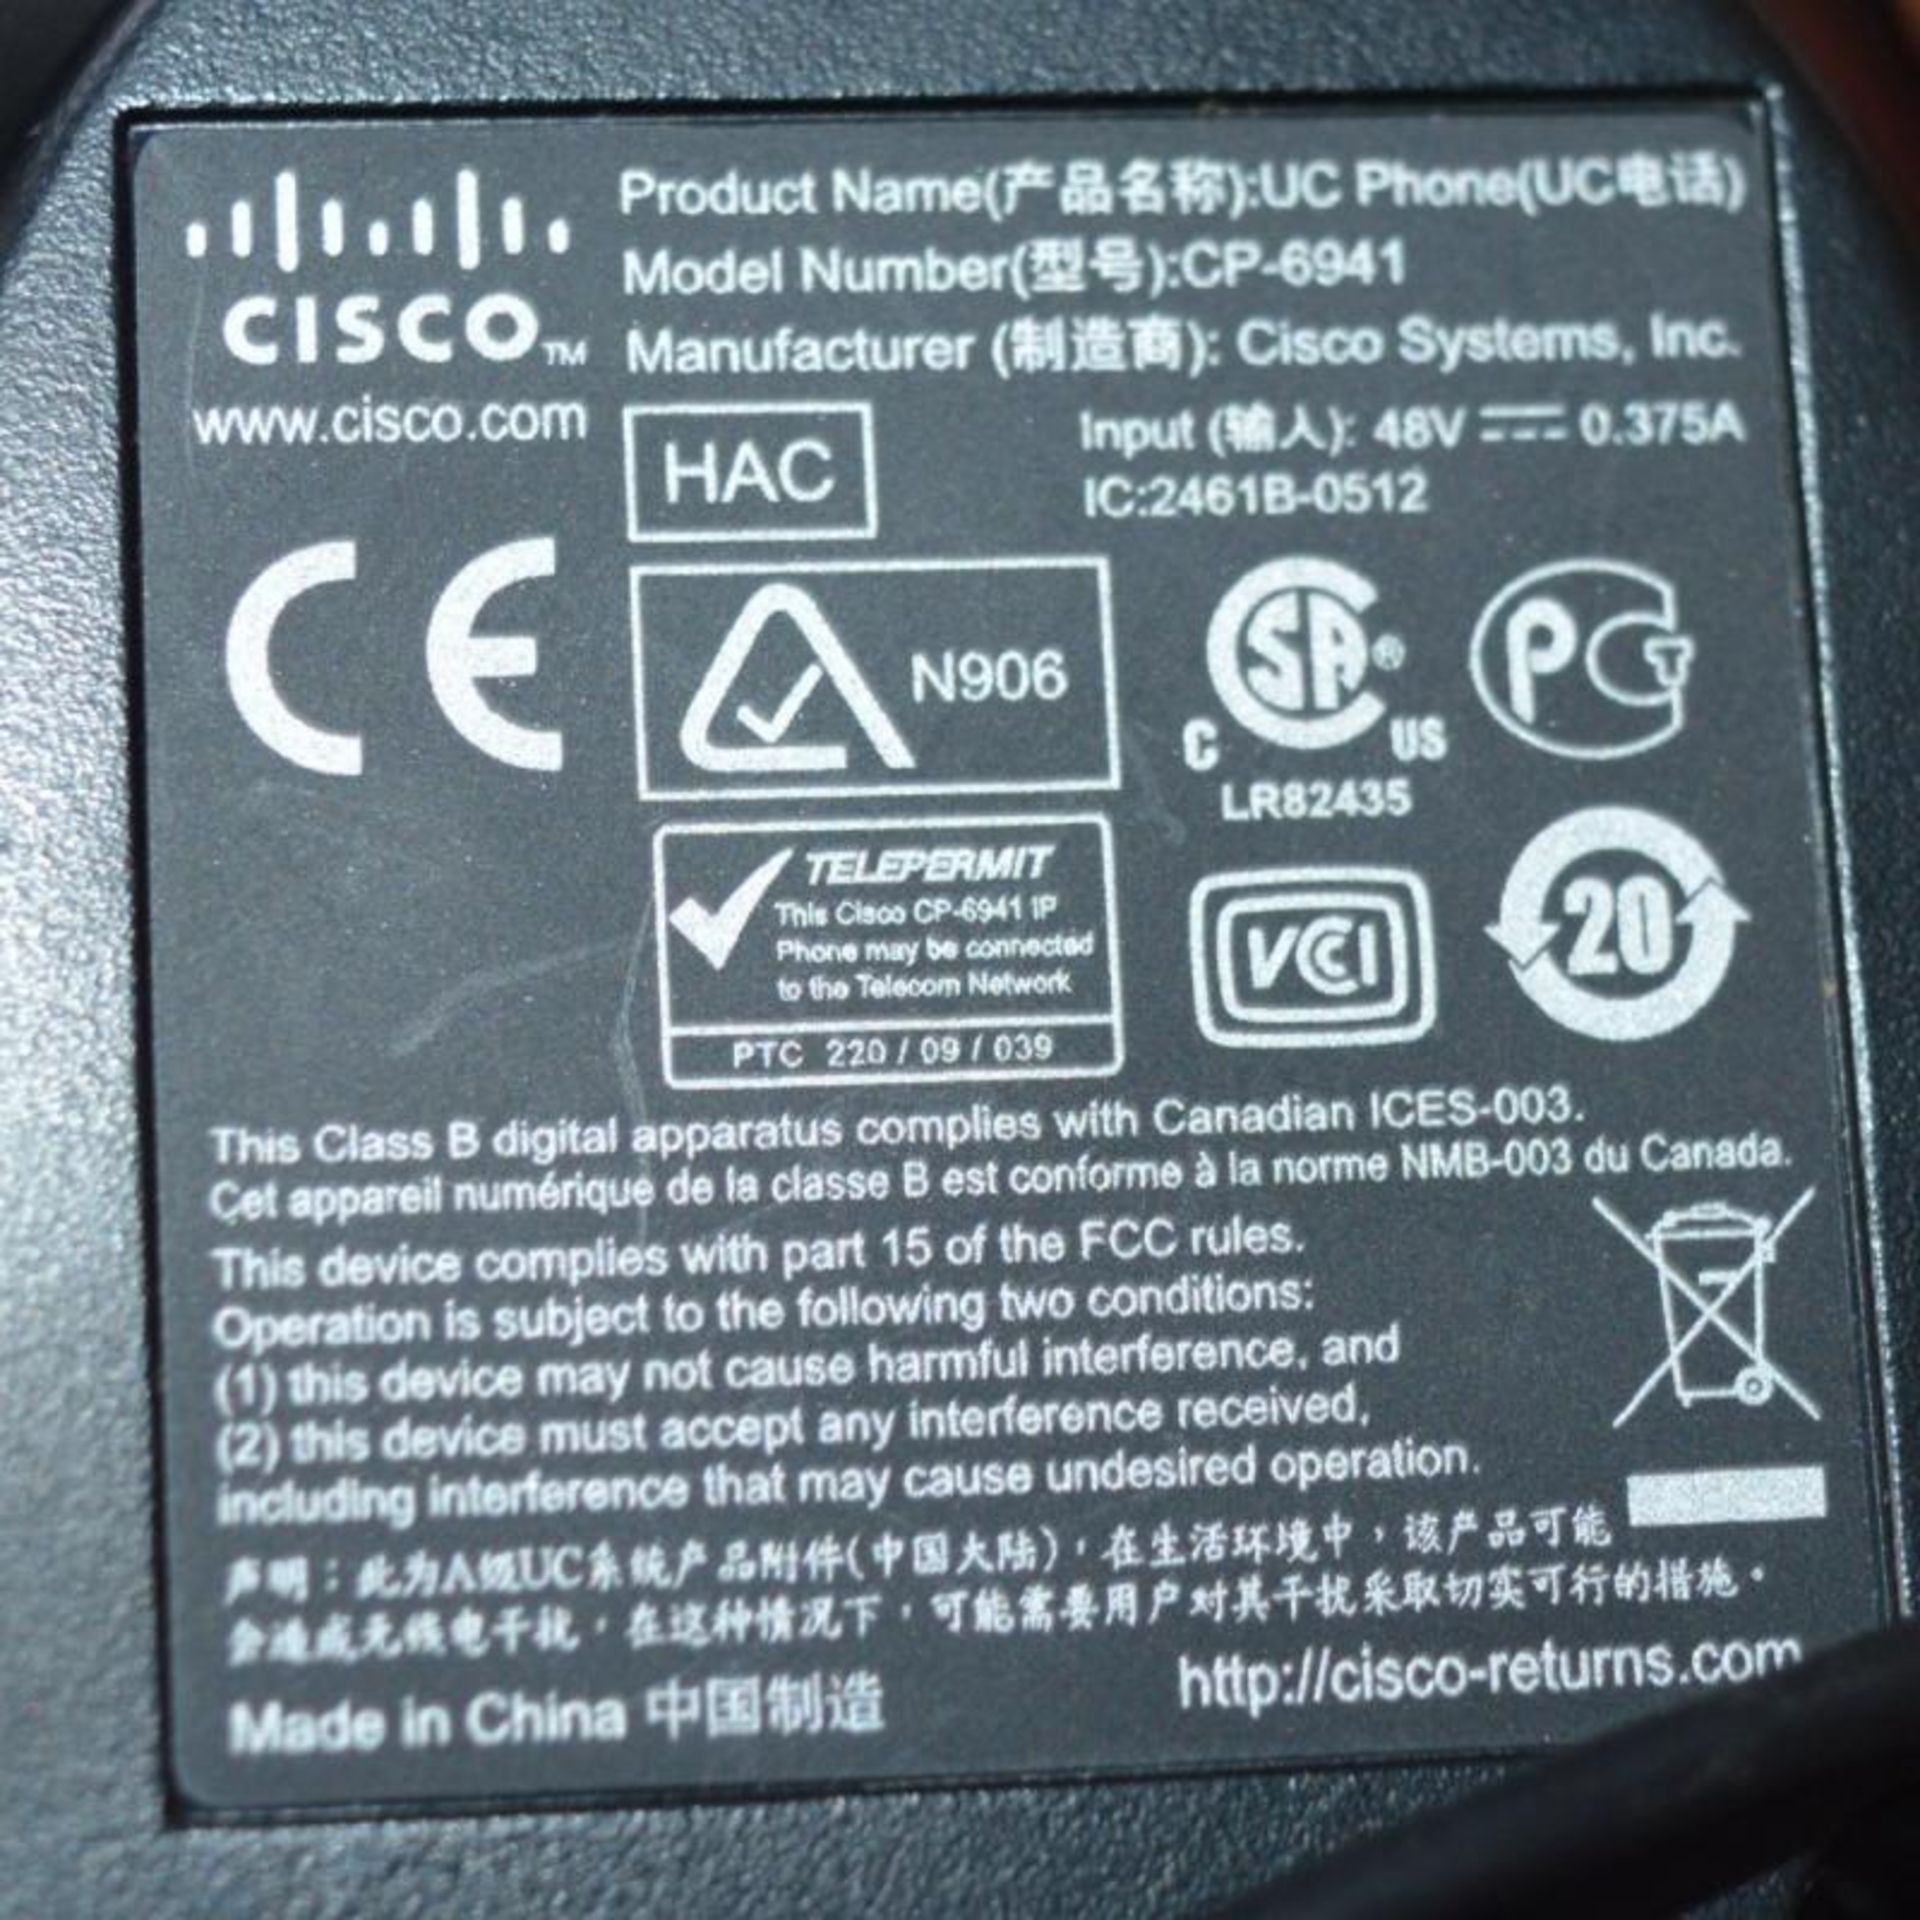 1 x Cisco CP-6941 Unified IP Phone Handset With Headset - From Working Office Environment Presented - Image 2 of 2